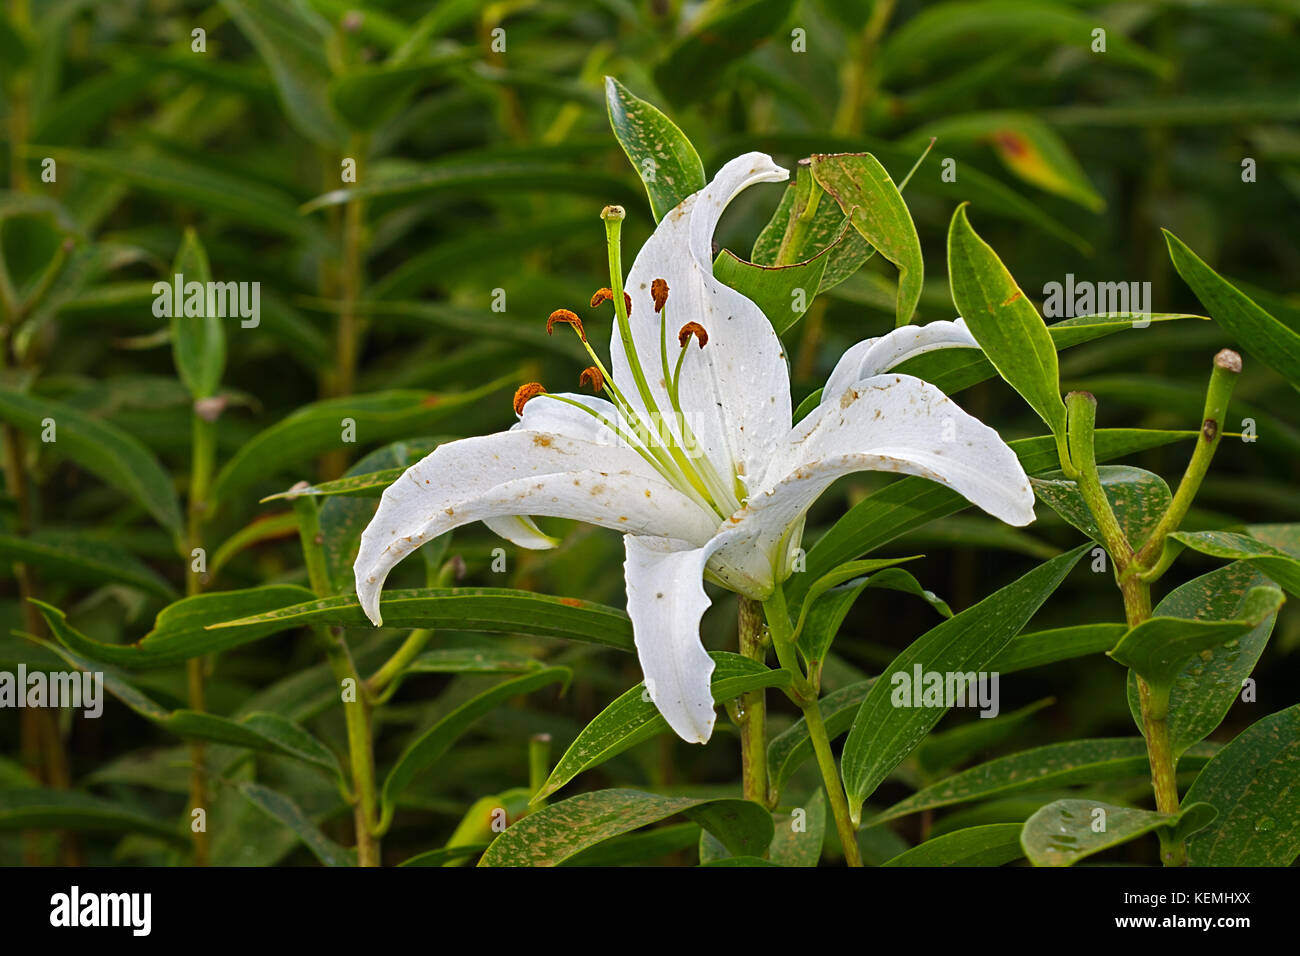 Cultivation of Lilies in agriculture, a field of Lilies with one white flower Stock Photo